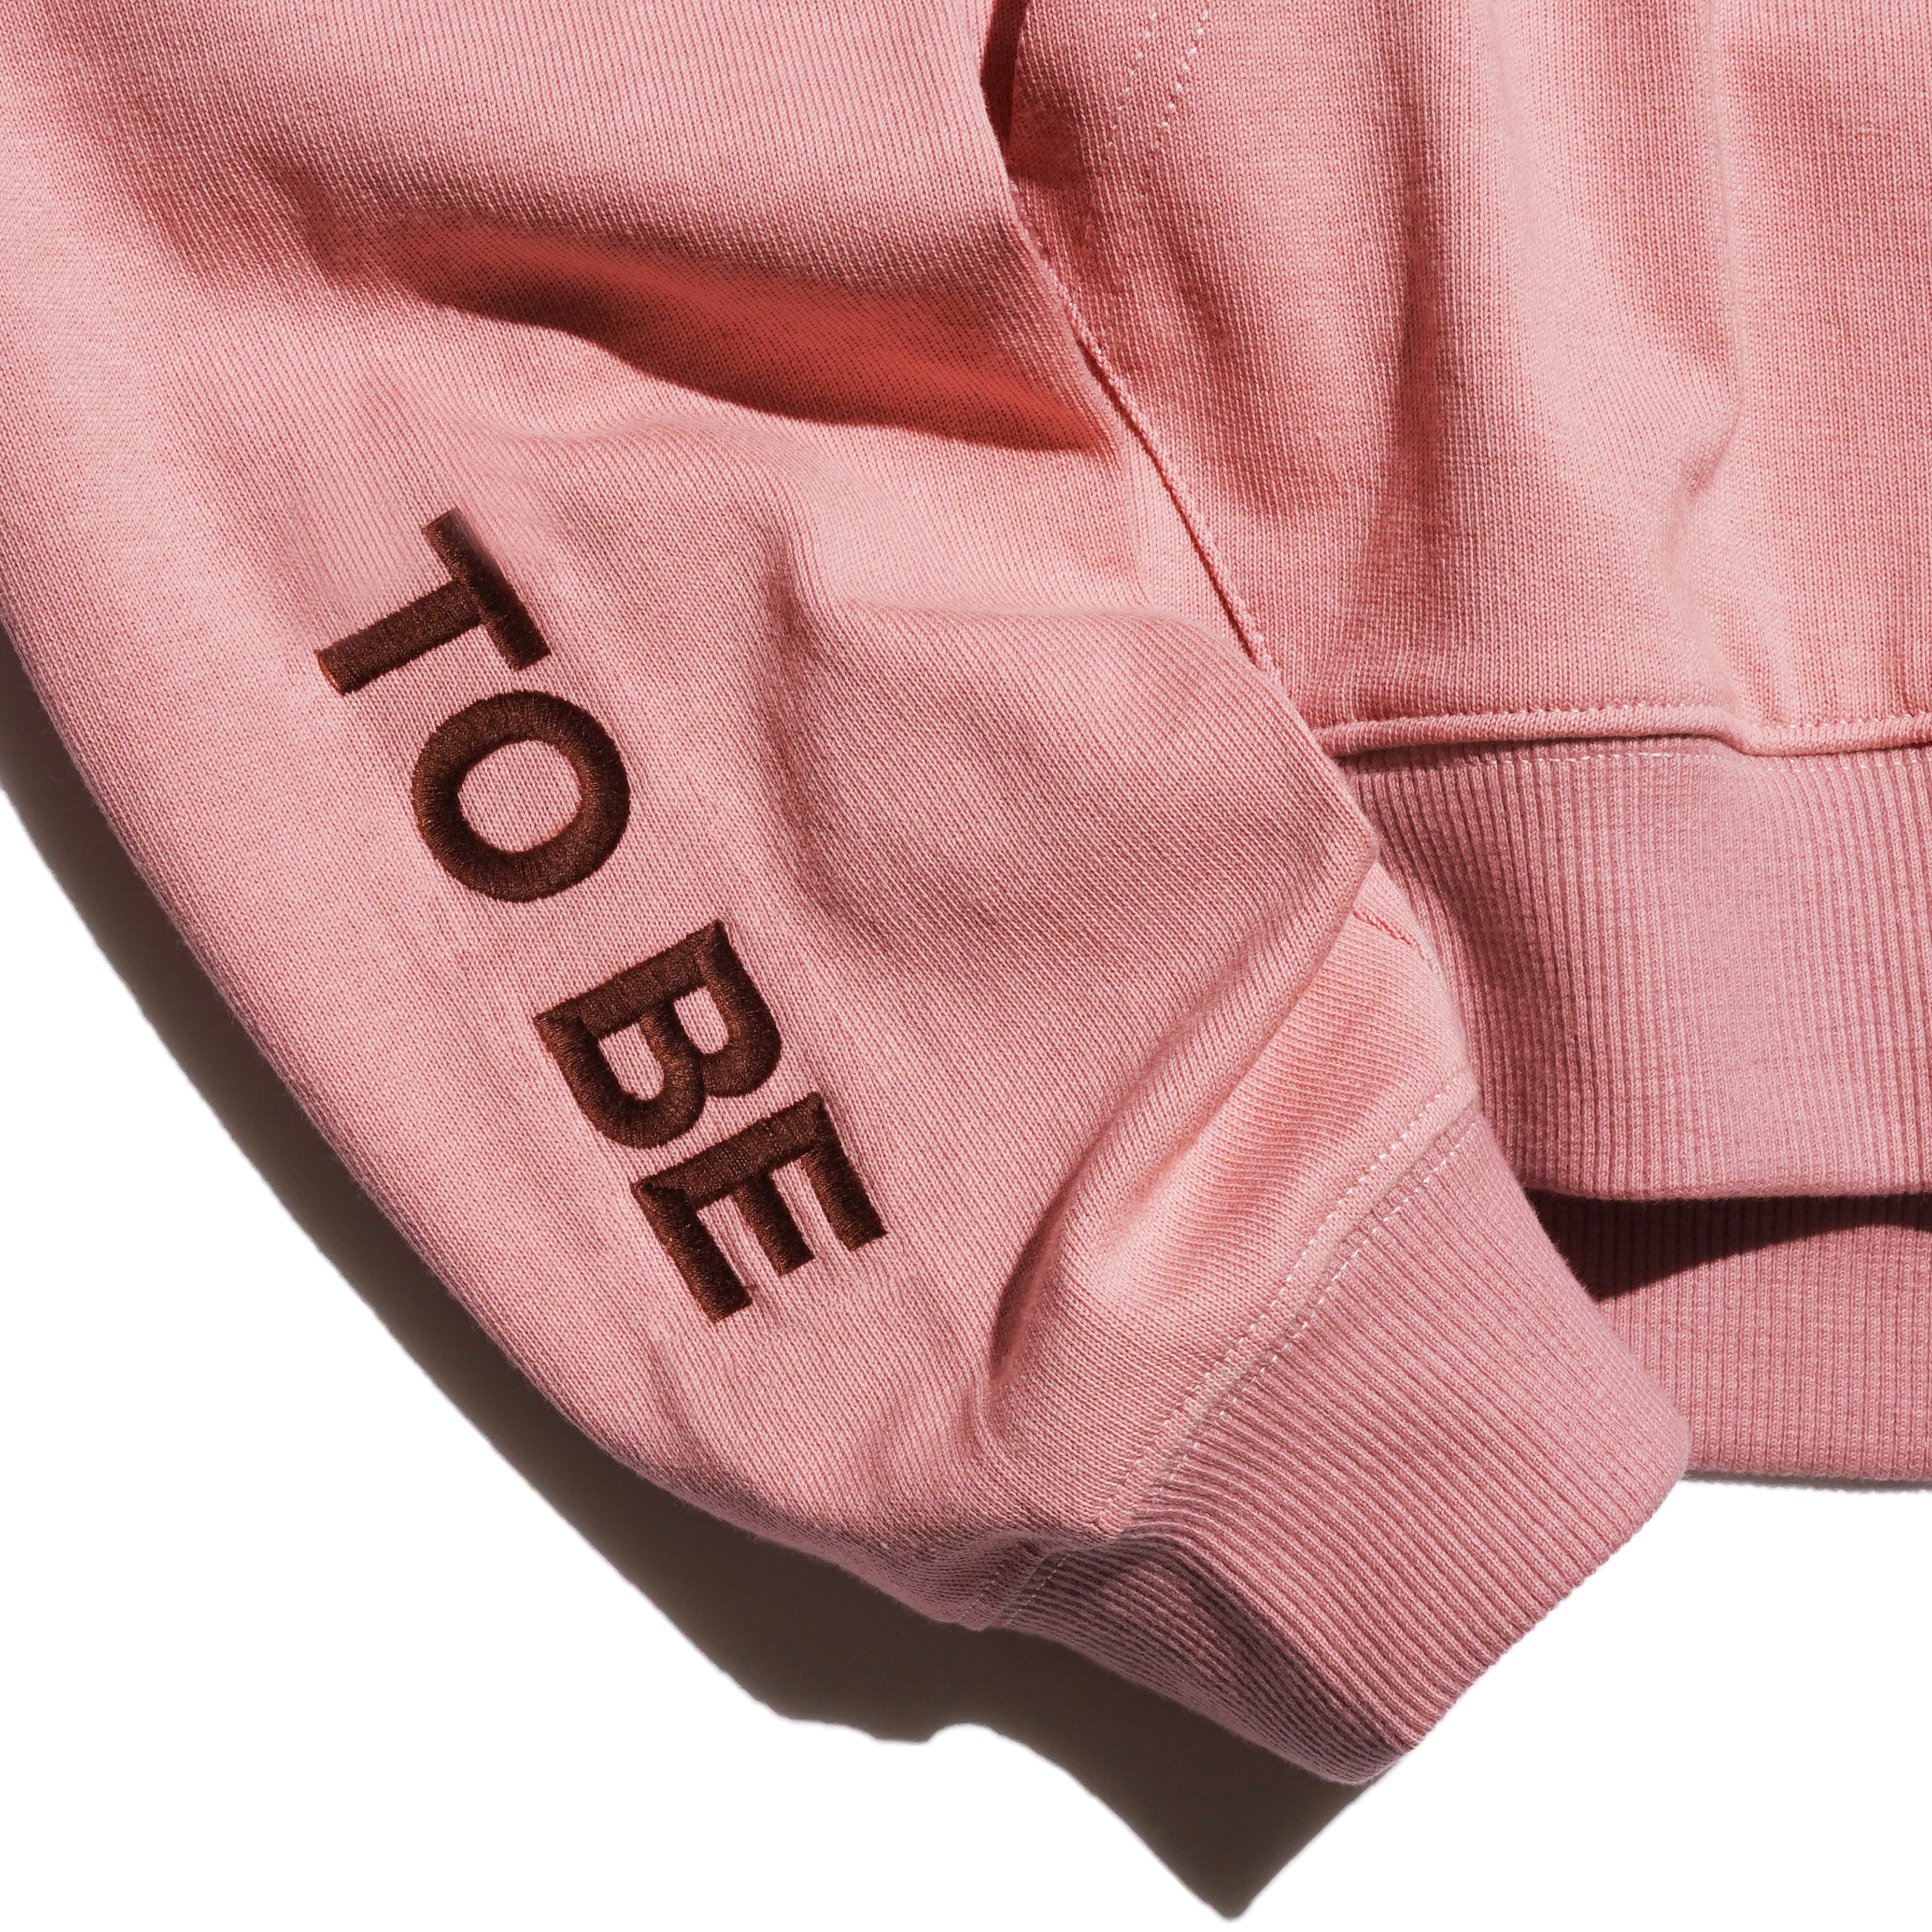 'TO BE KIND’ Embroidered Patch Hoodie